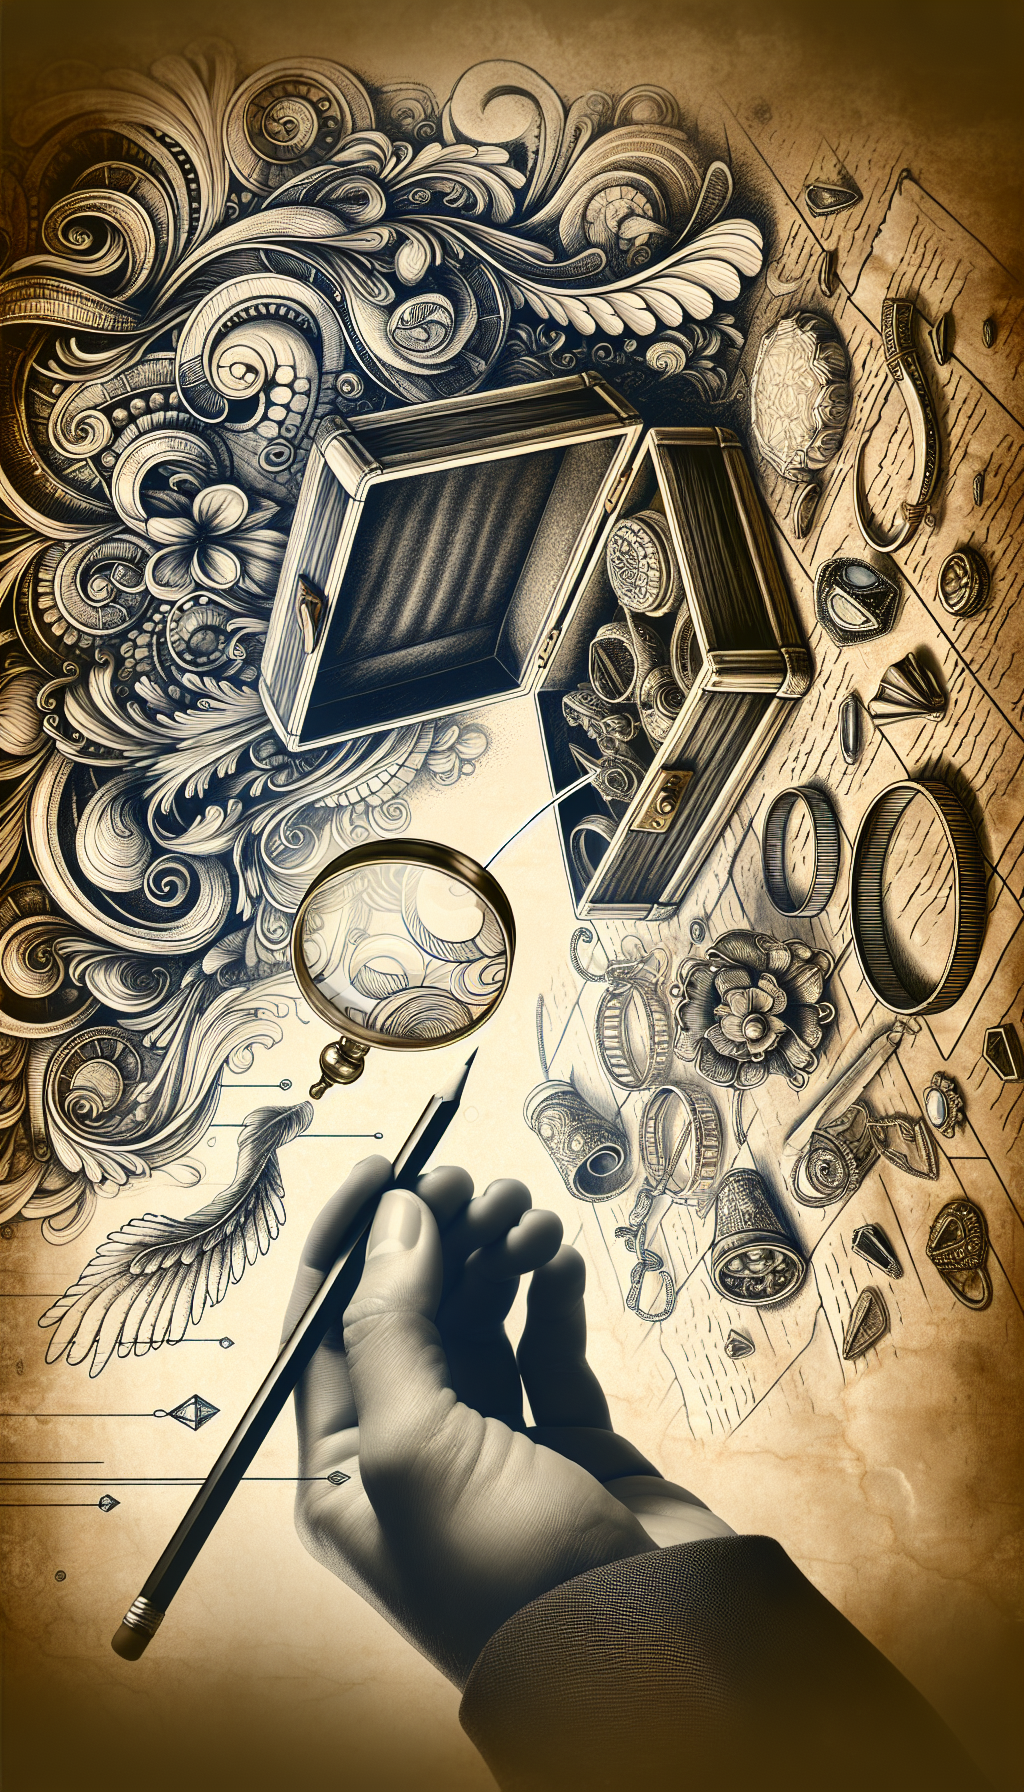 A magnifying glass hovers over an ornate, open jewelry box, revealing hidden hallmarks on vintage trinkets inside. Styles clash—Art Deco edges meet Baroque swirls—while a phantom hand, pencil in grasp, sketches lines connecting each piece to a floating, aged parchment labeled "Antique Jewelry Identification Guide." The juxtaposition symbolizes the investigative journey of dating heirloom treasures.